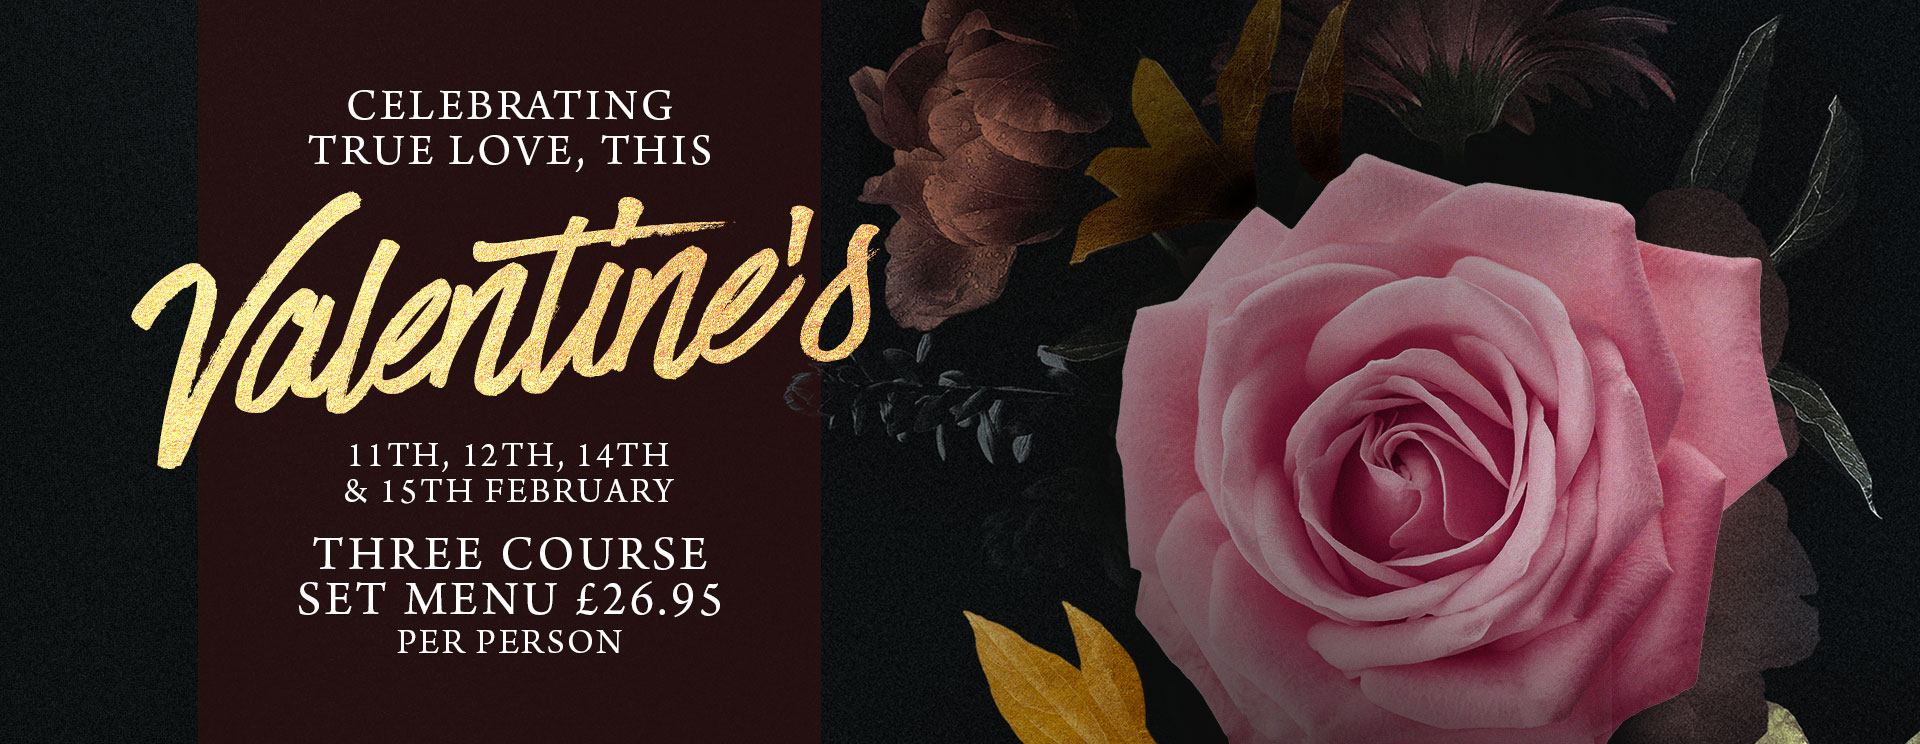 Valentines at The King's Arms